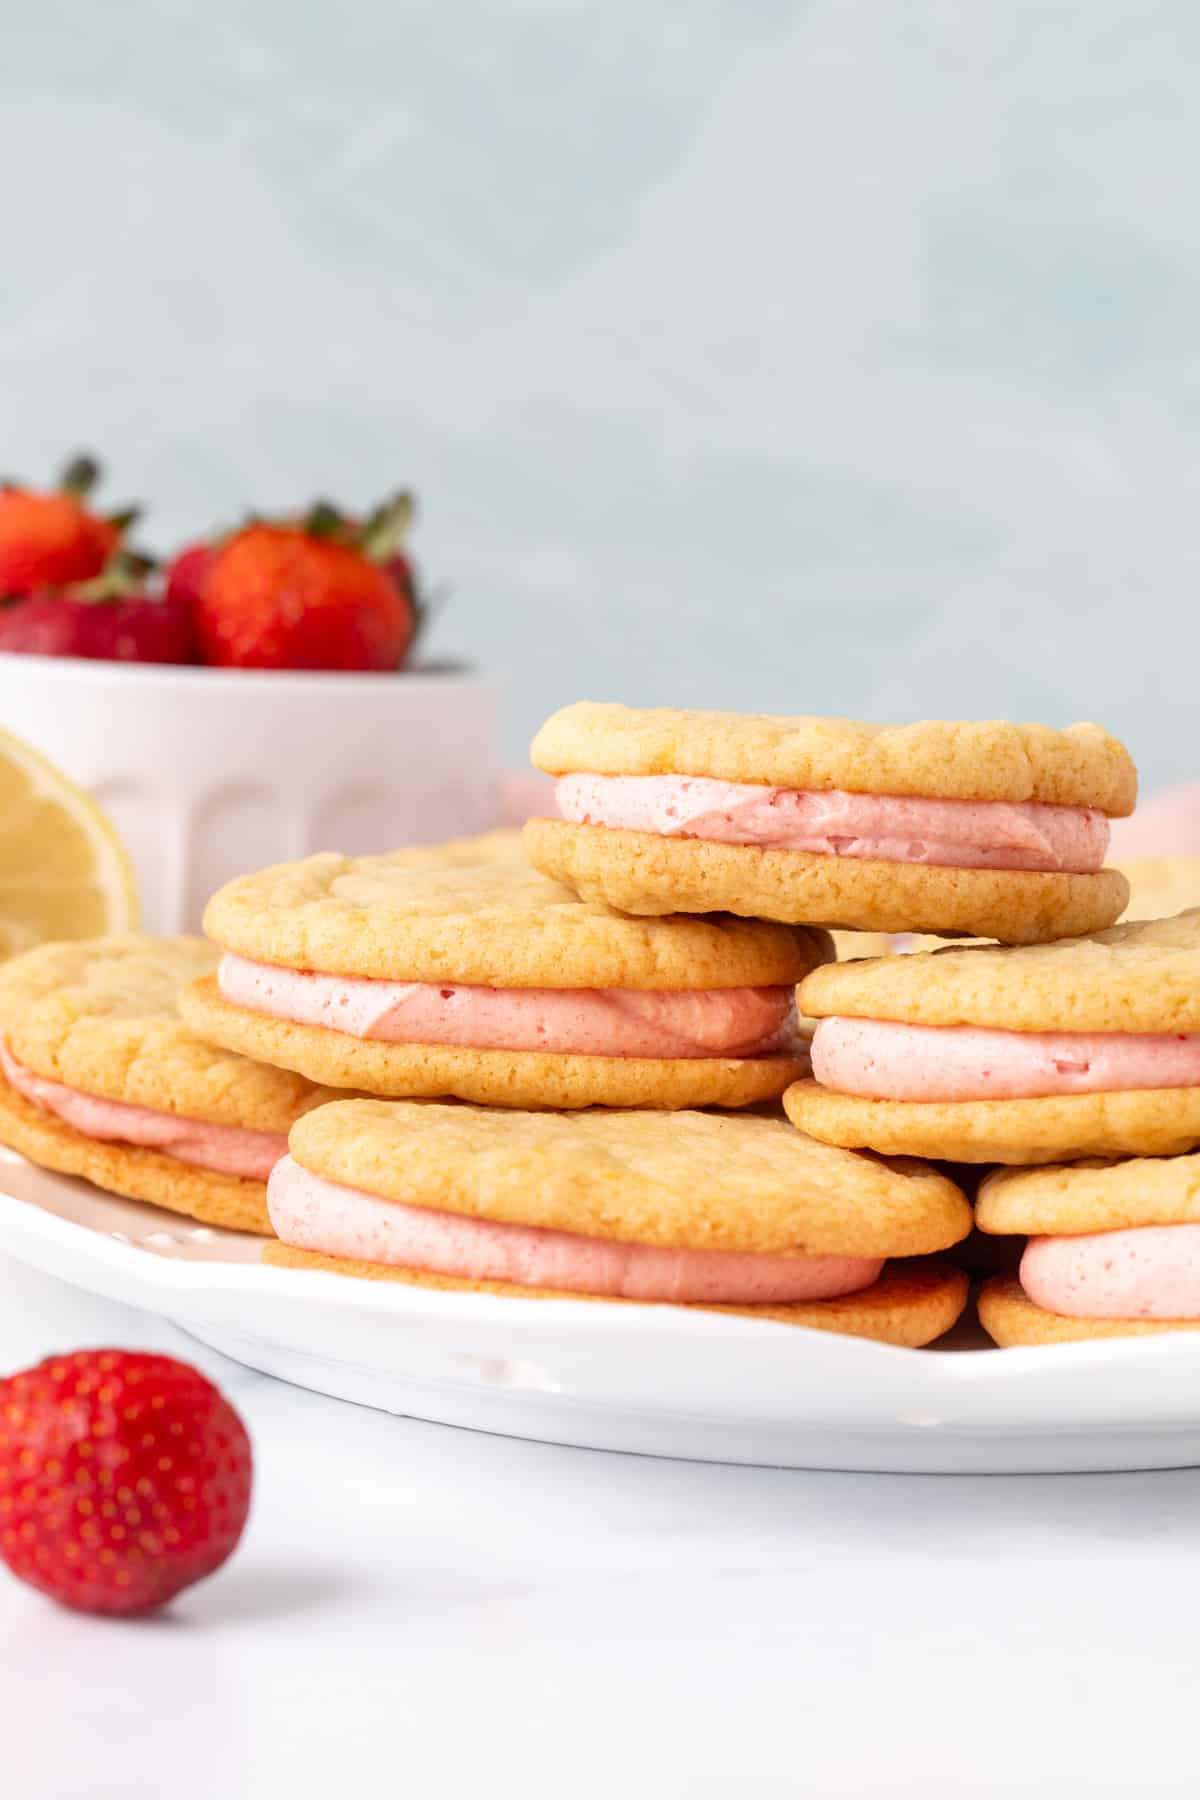 Plate of lemon sandwich cookies with strawberry frosting, with cookies on top of each other